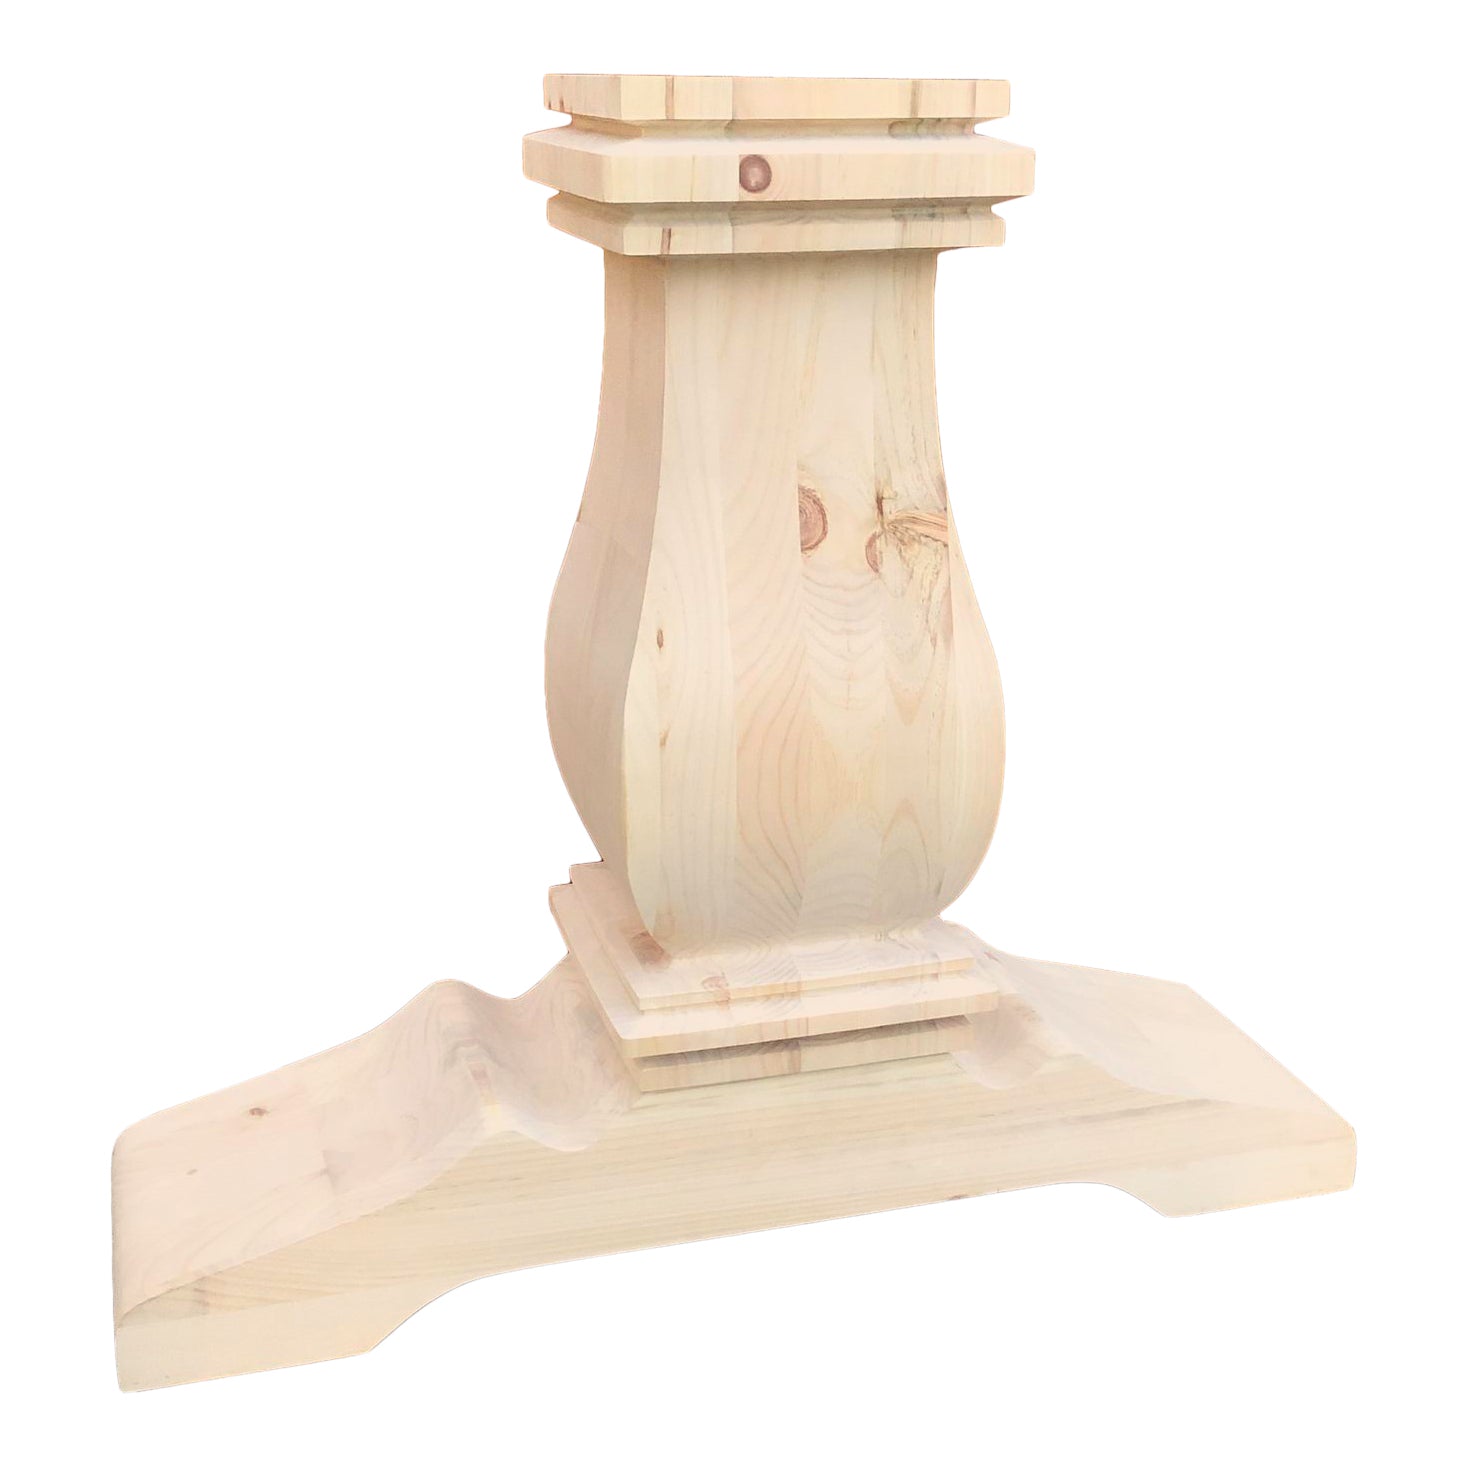 Pine Wooden Double Pedestal Base Set - 9" x 9". Handcrafted by Carolina Leg Co